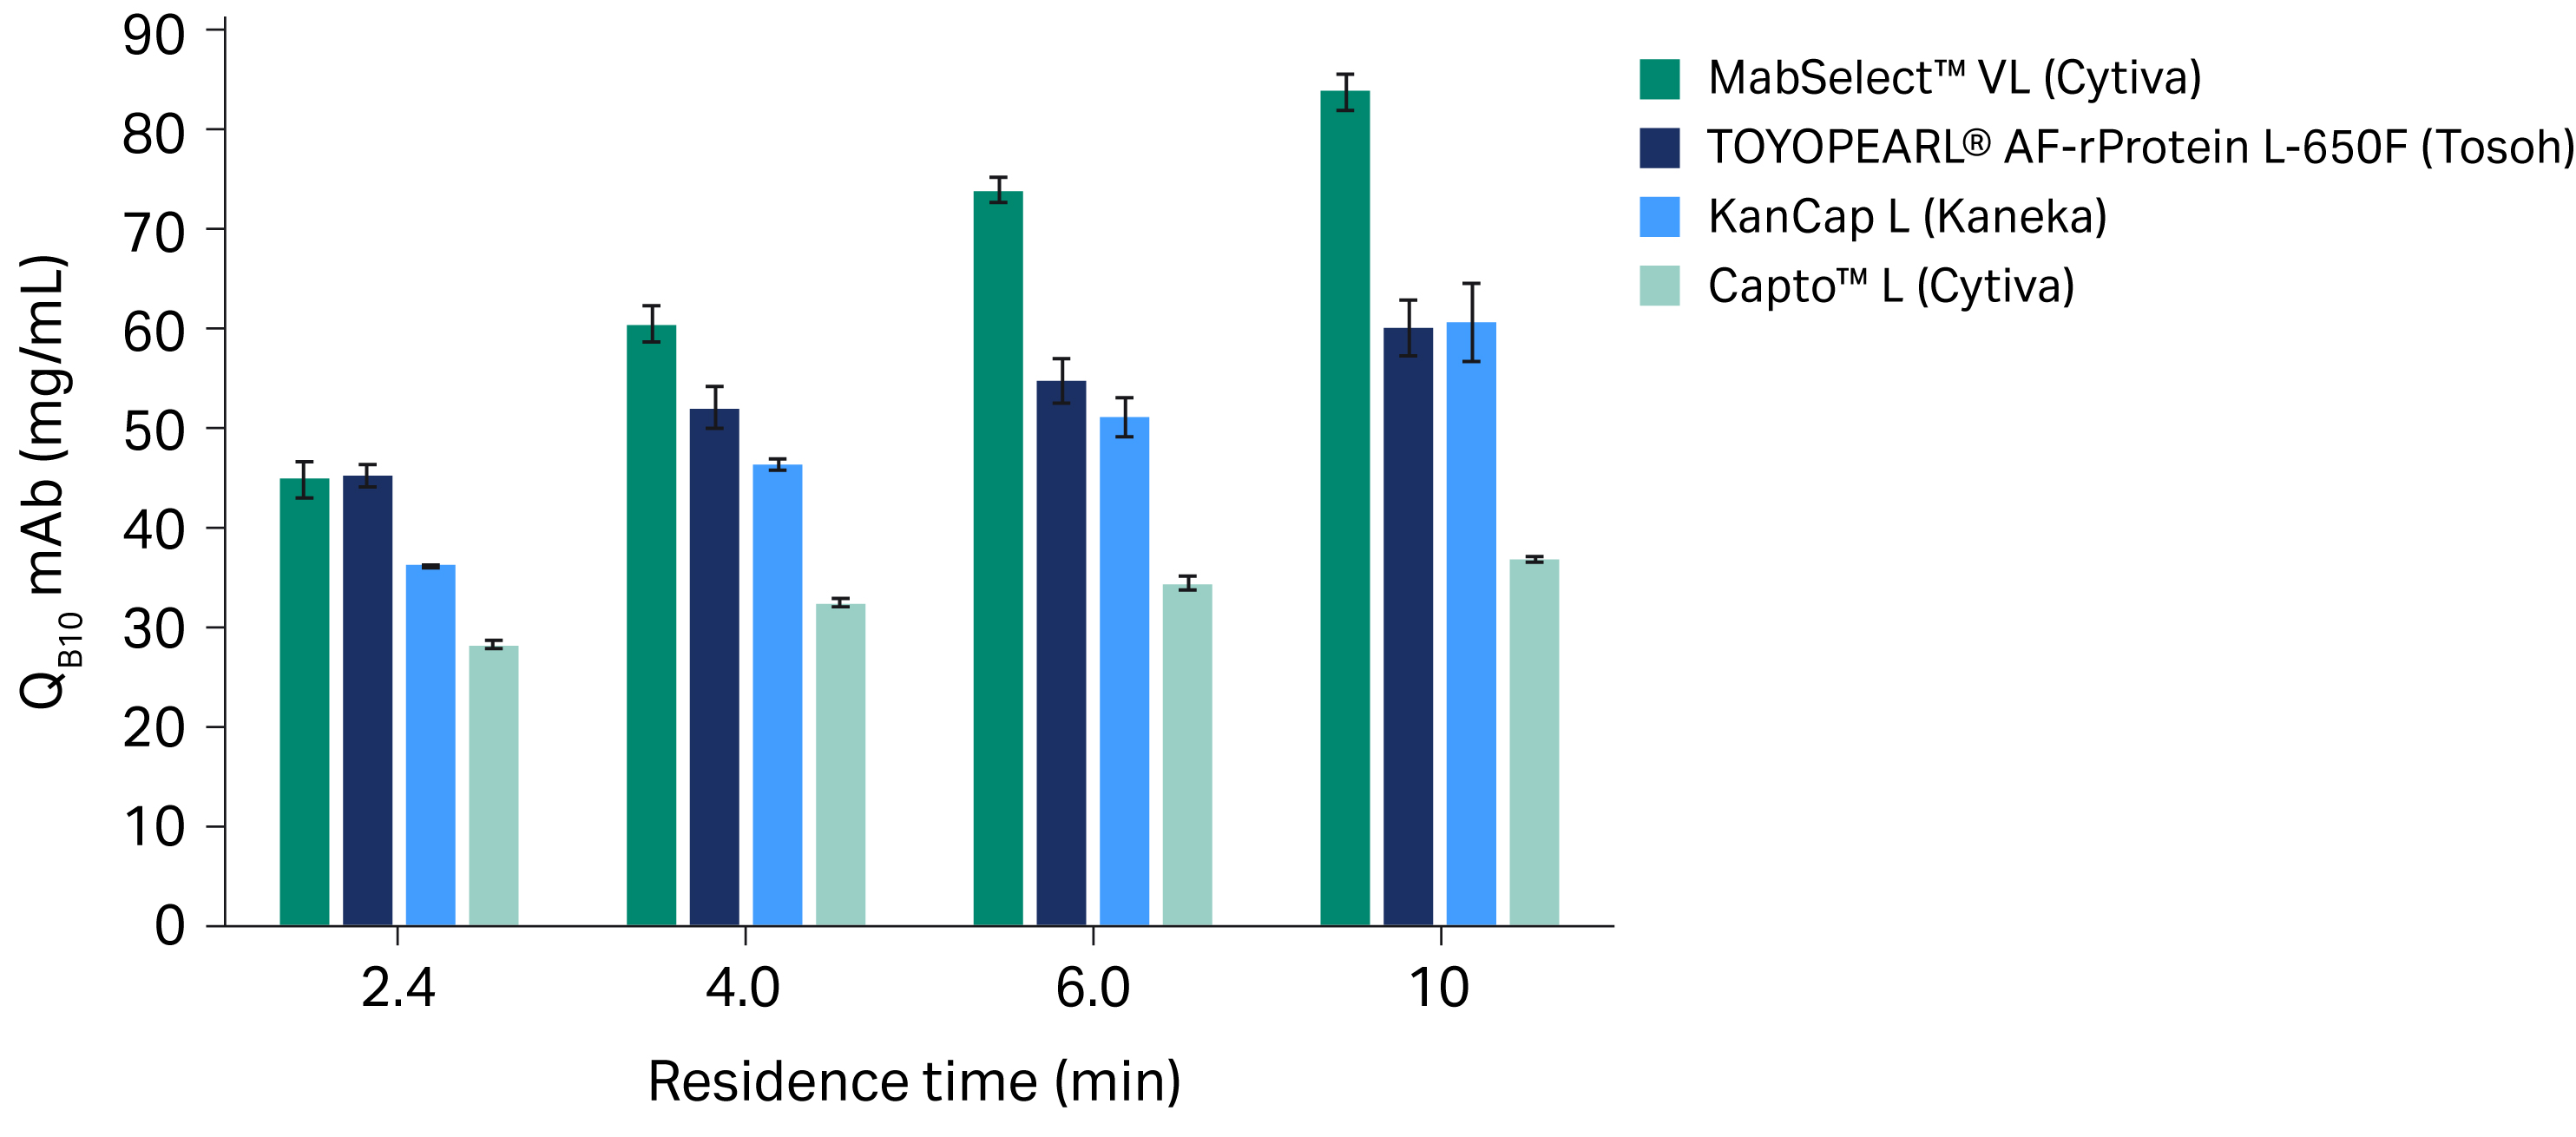 Dynamic binding capacity (mean Q<sub>B10</sub>) for protein L chromatography resins with mAb samples at different residence times.